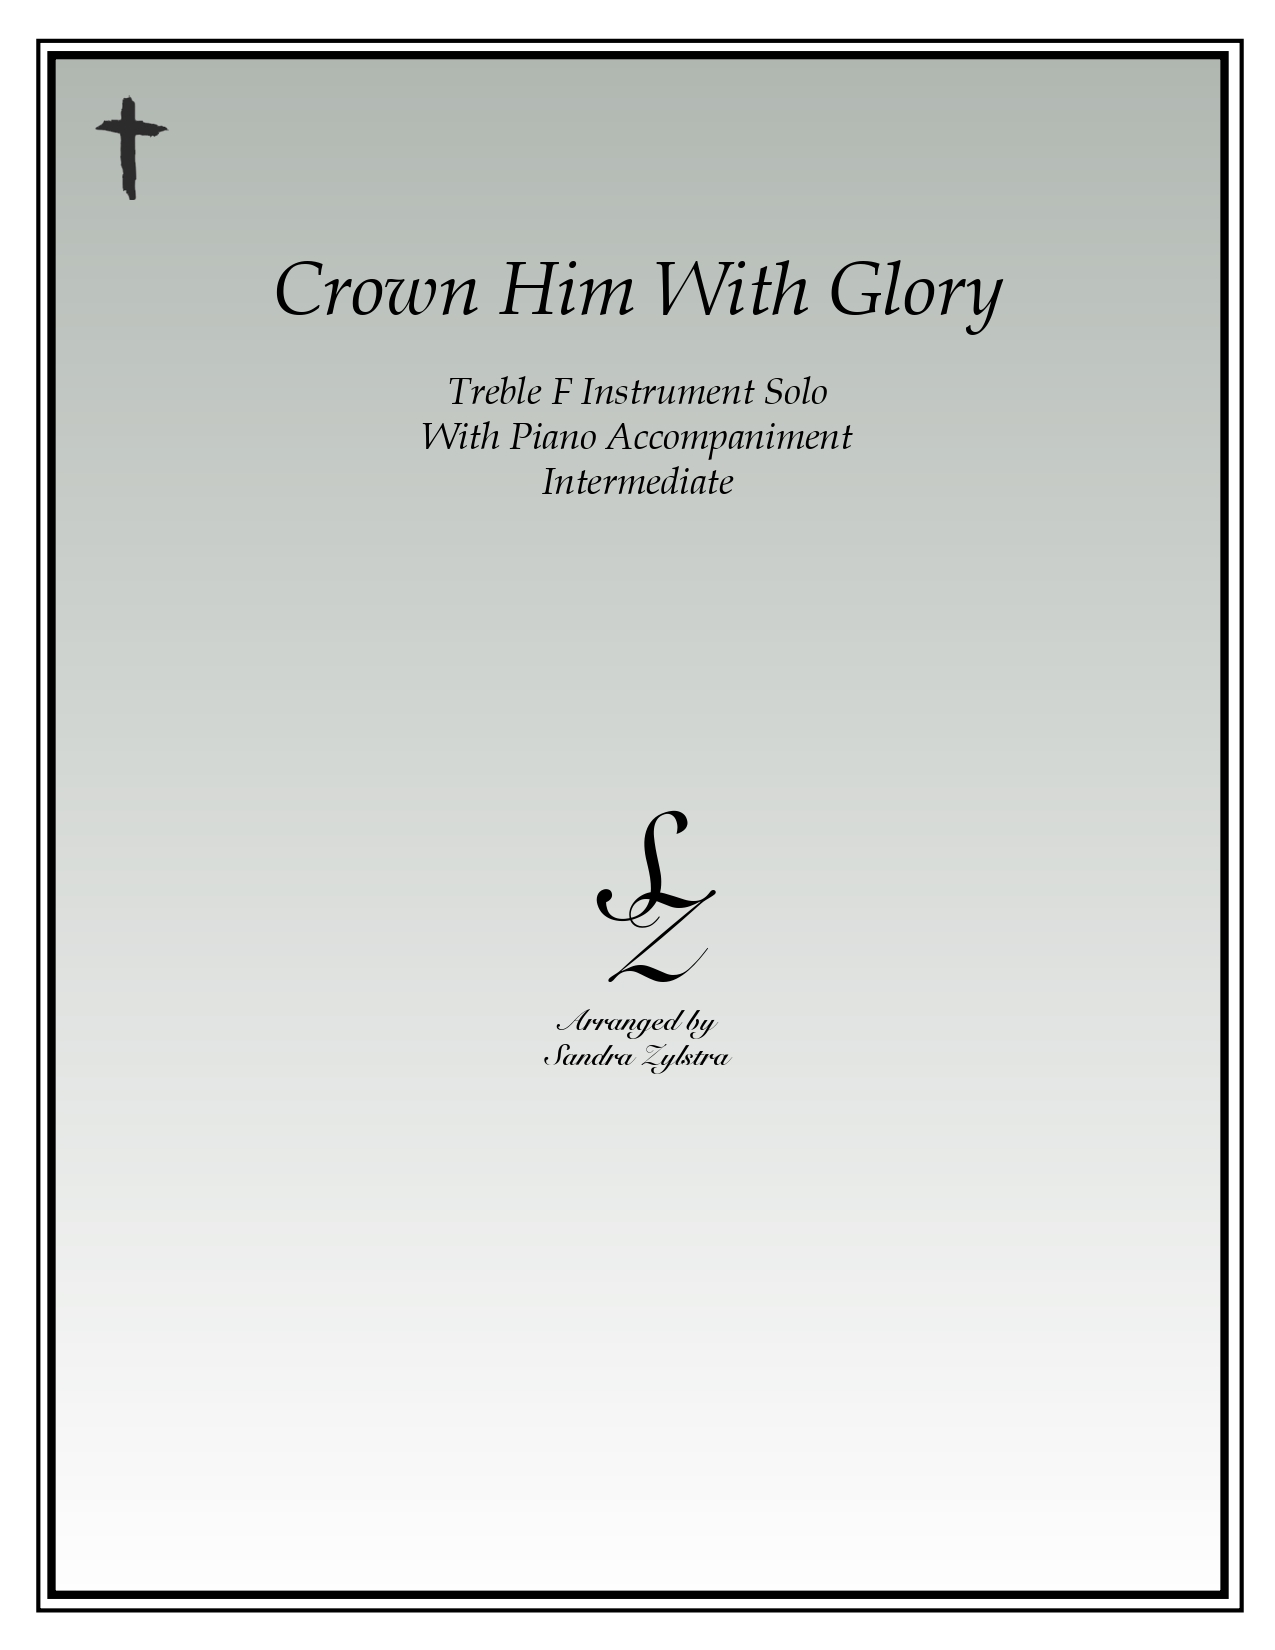 Crown Him With Glory F instrument solo part cover page 00011